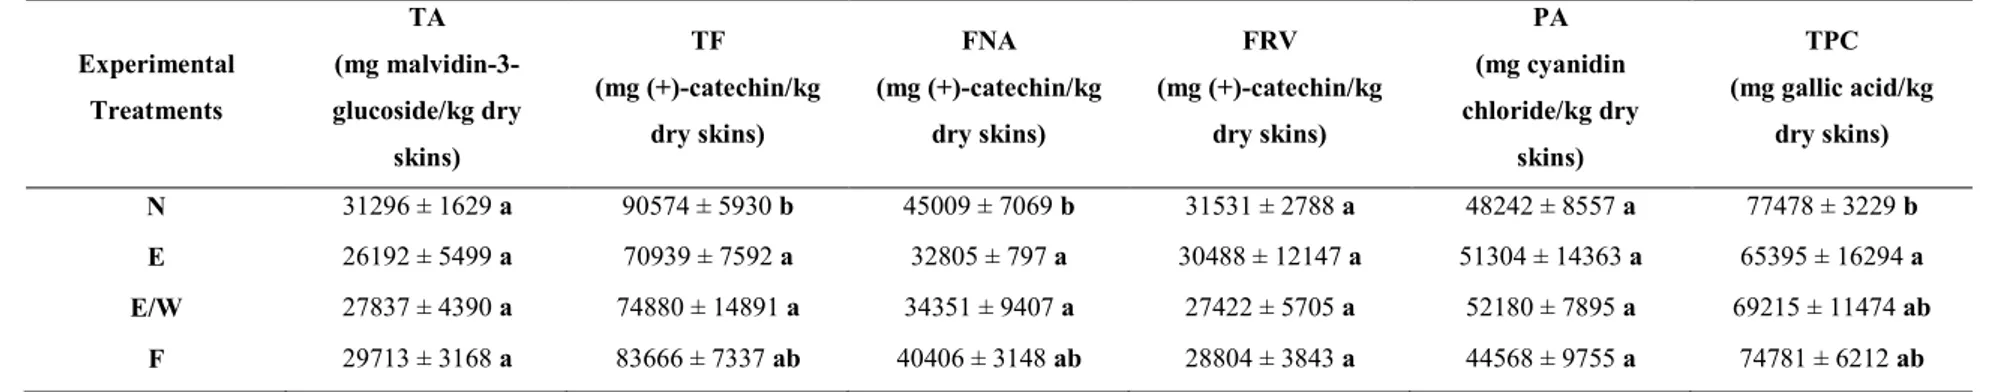 Table 4 – Effect of leaf removal on the phenolic composition of skins of Uva di Troia grapes